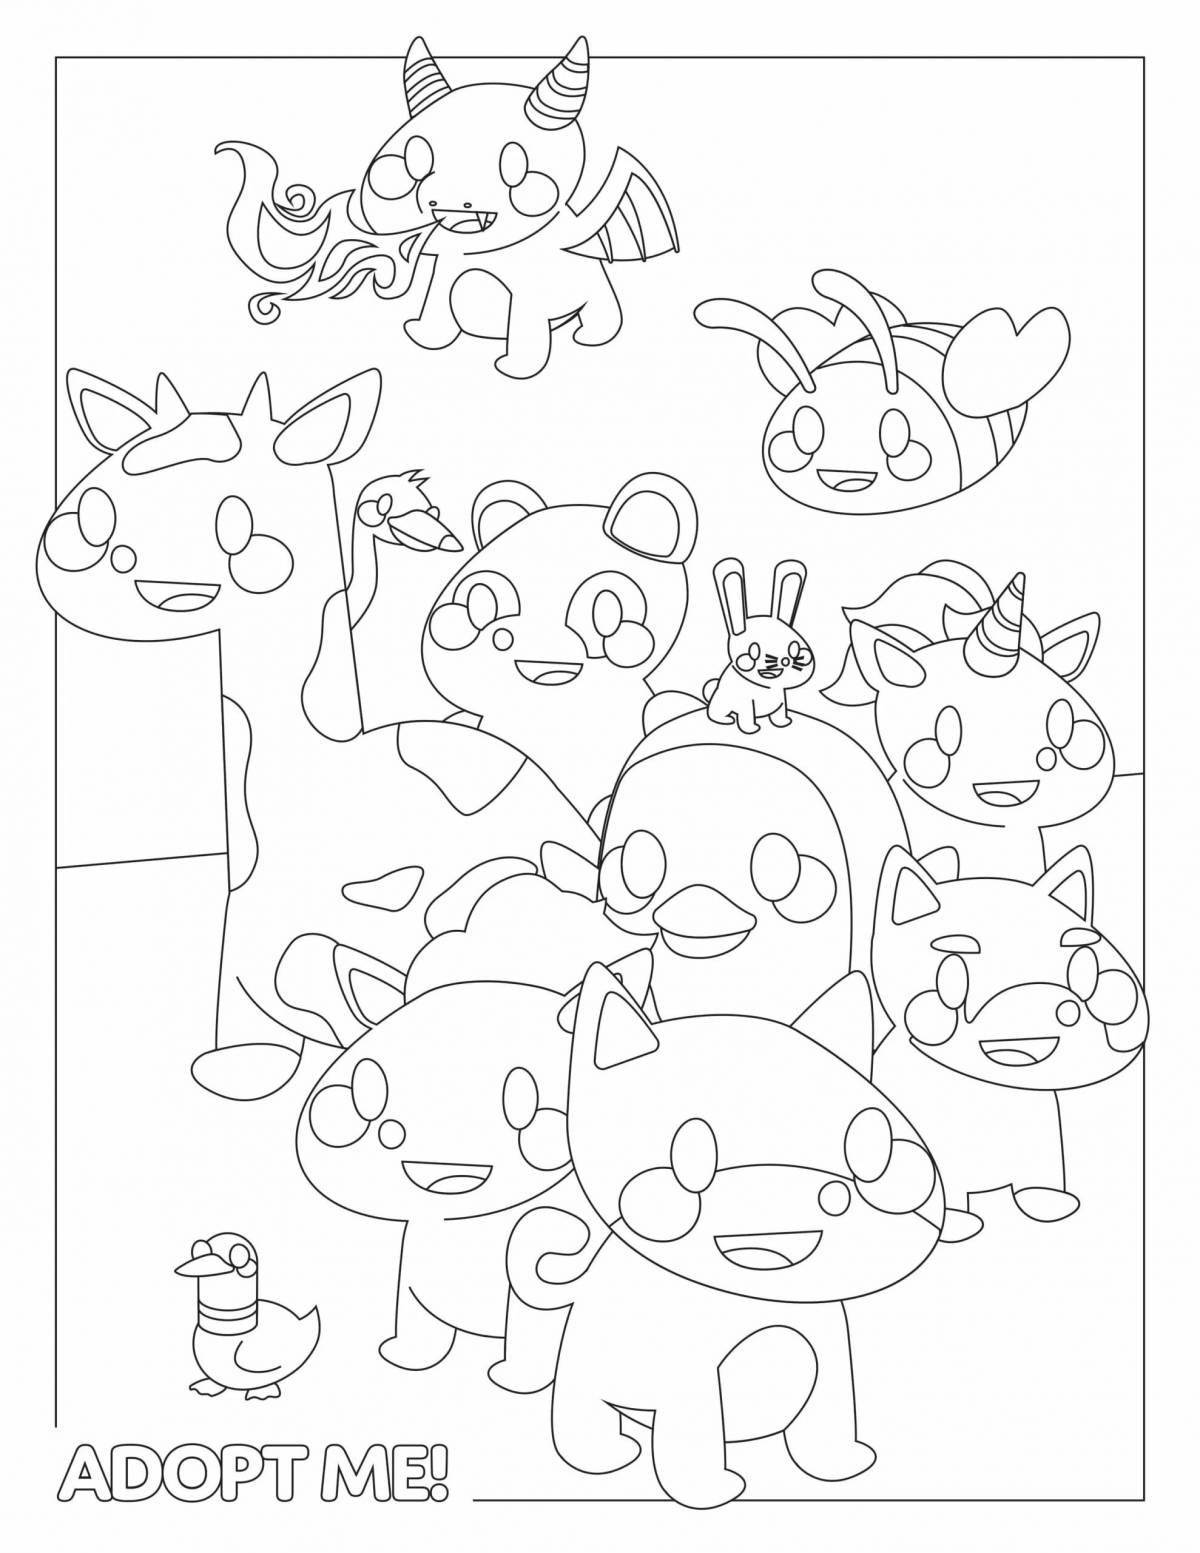 Adorable coloring page adopt me peta and eggs